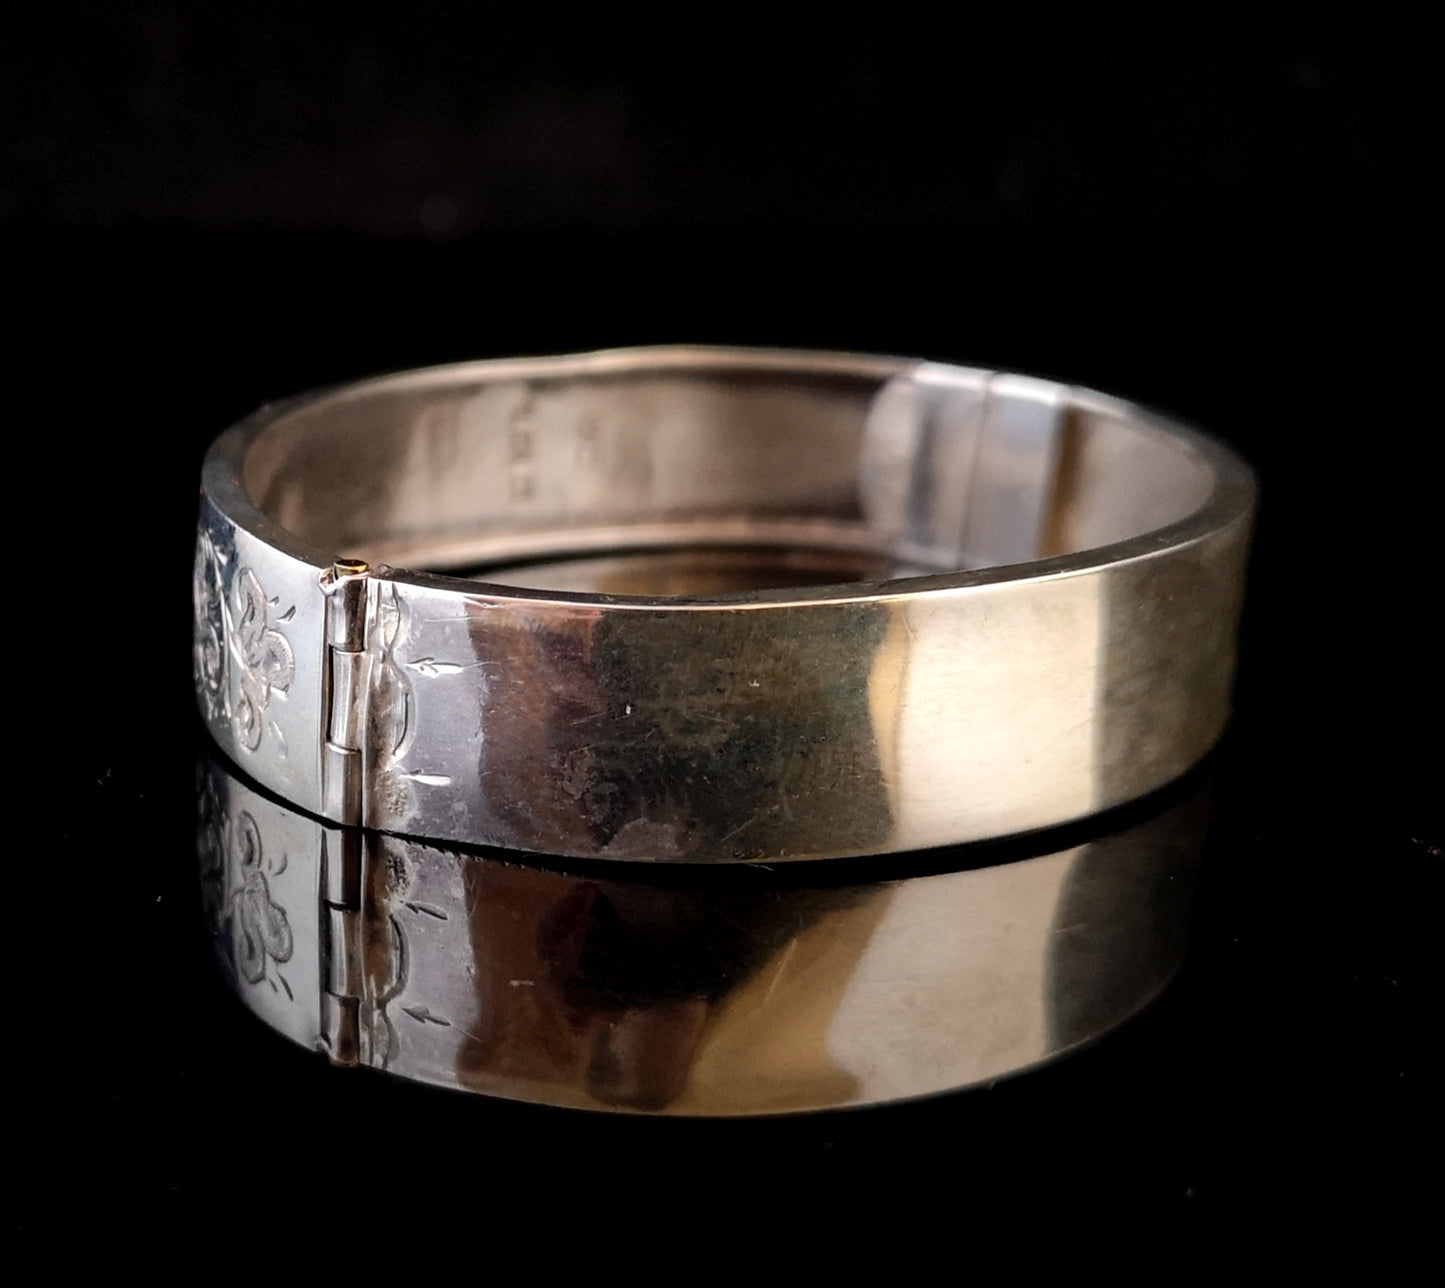 Antique Victorian silver bangle, aesthetic engraved